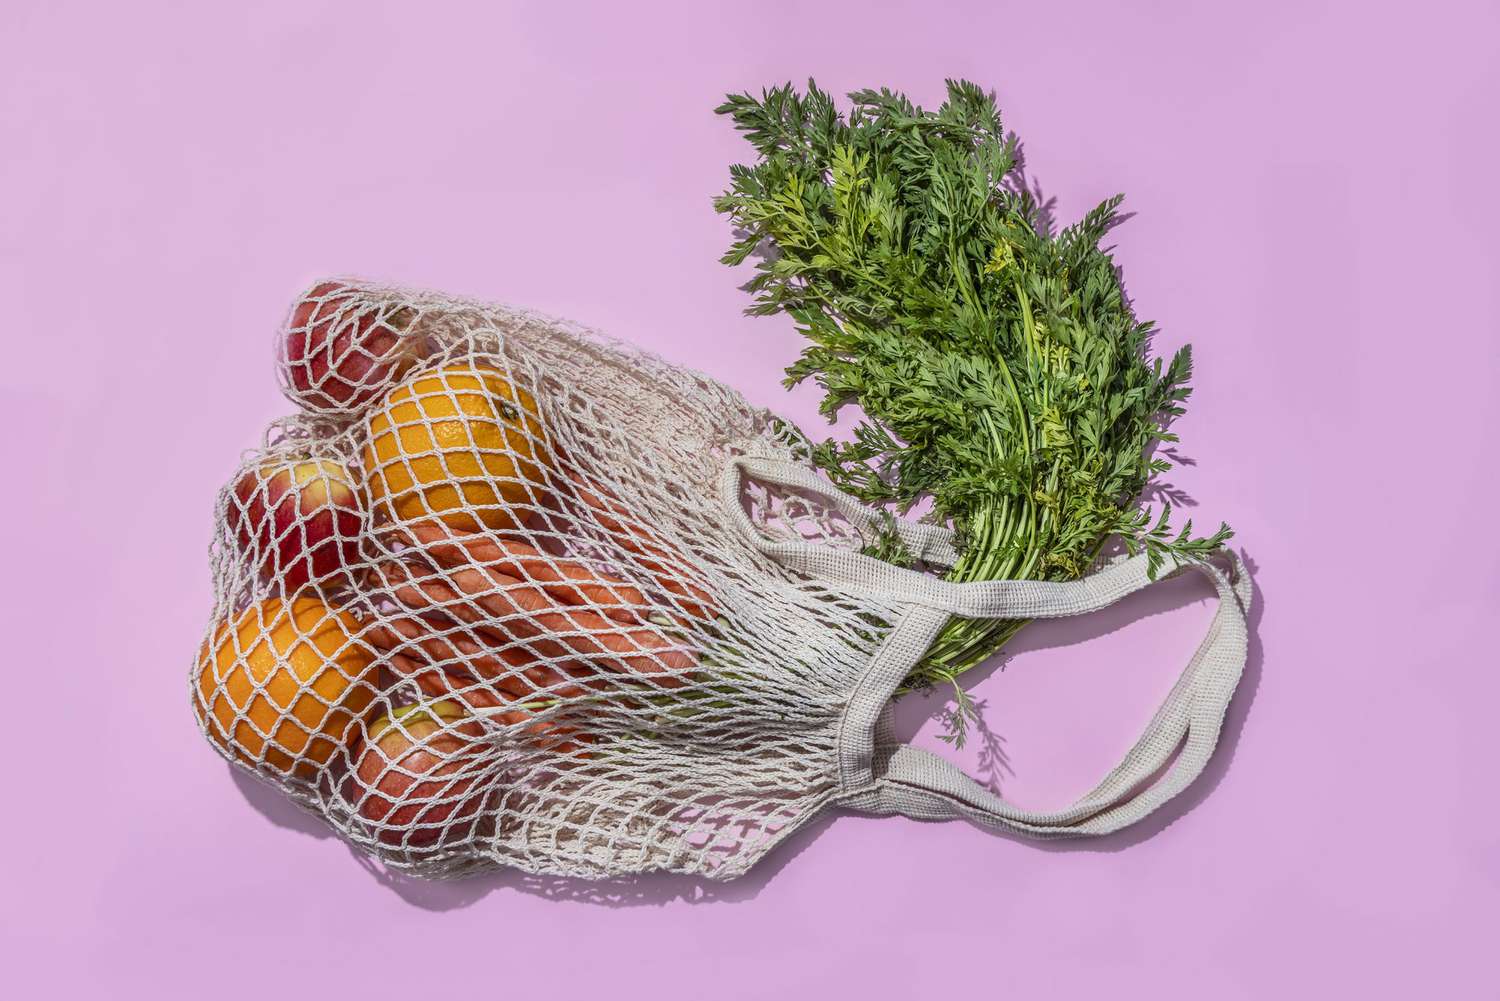 Reusable Cotton Mesh Bag With Fruit And Vegetables